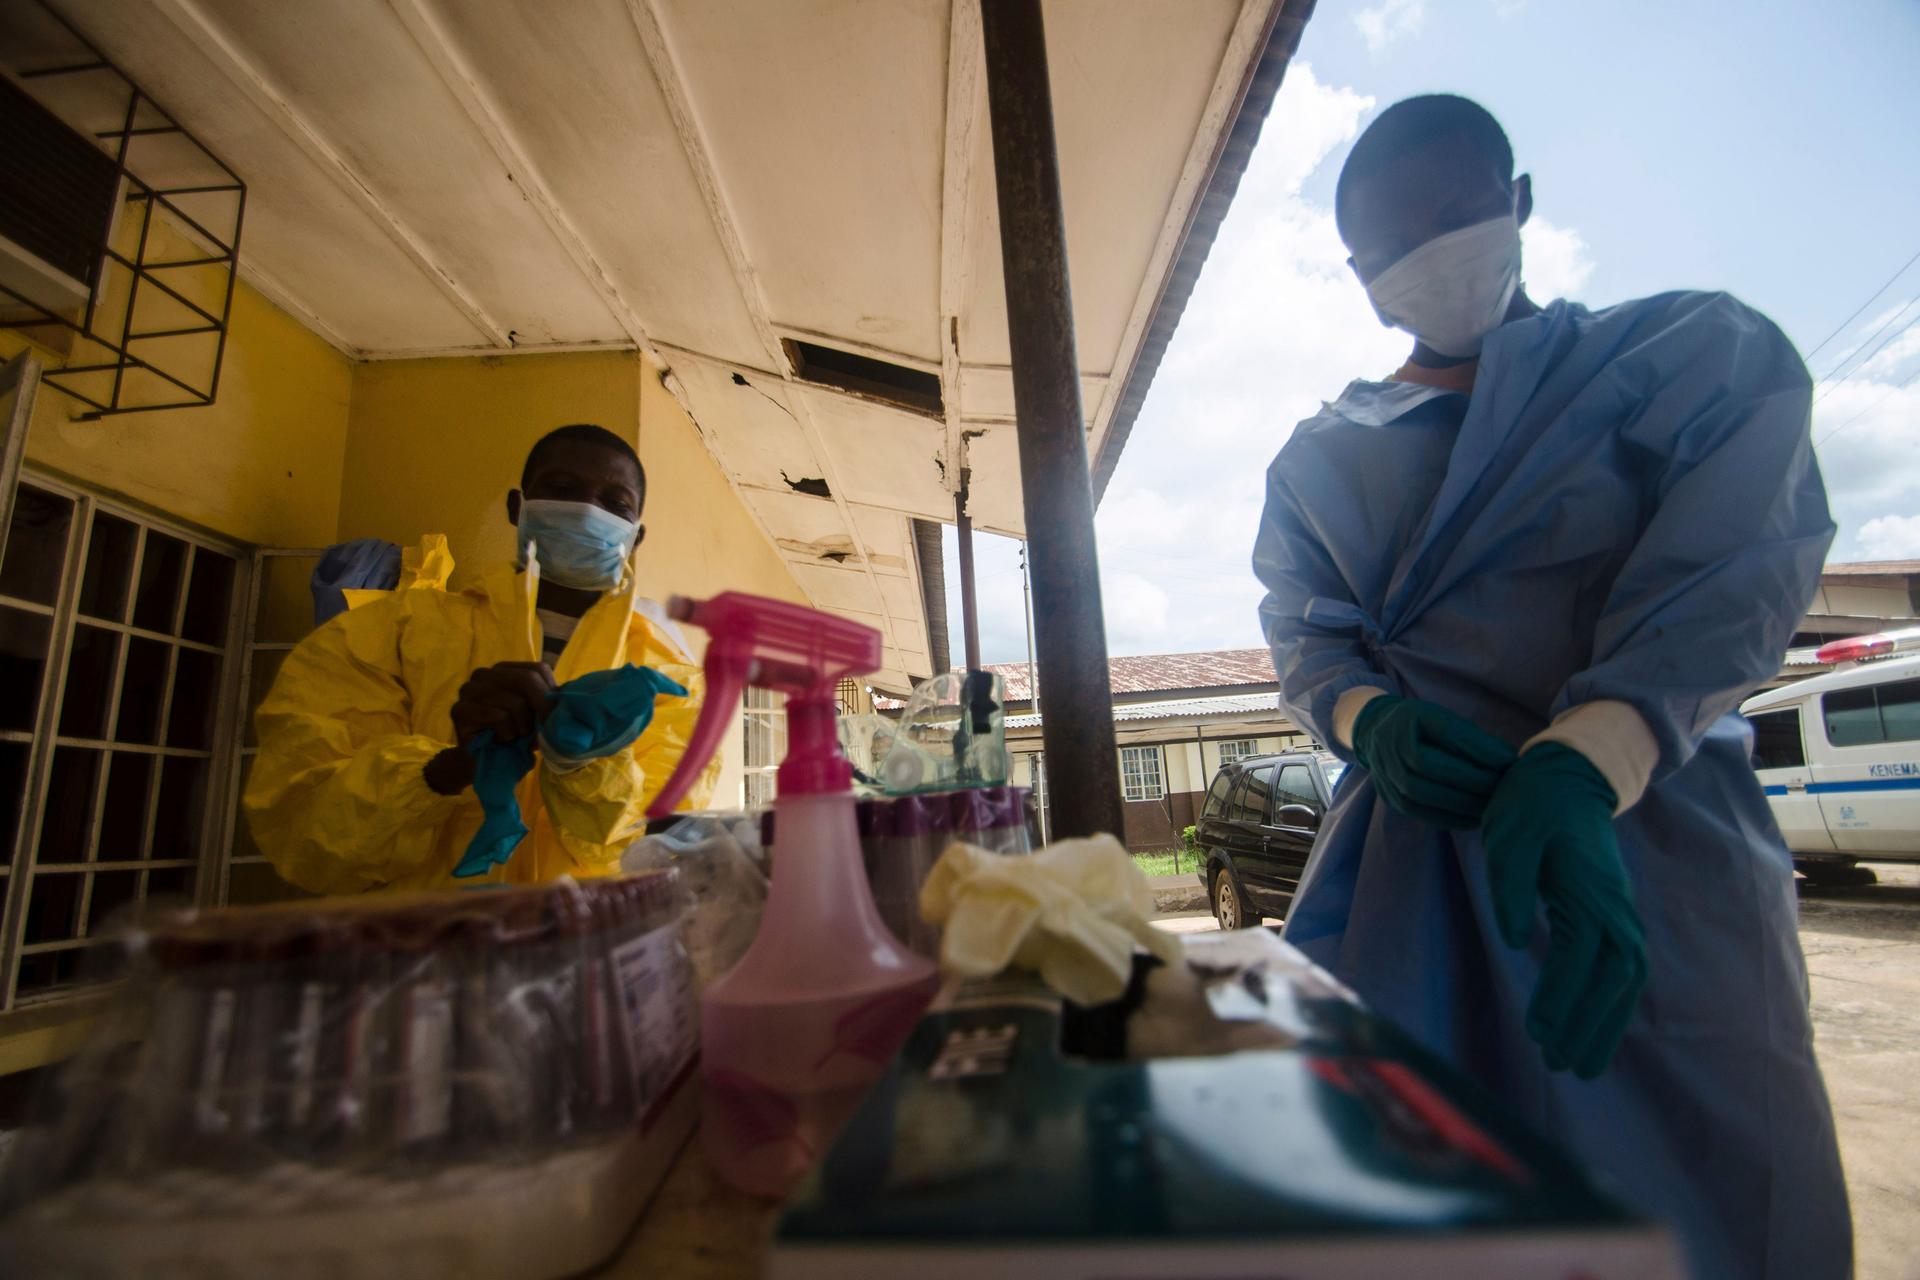 Medical staff put on protective gear in the Kenema government hospital before taking a sample from a suspected Ebola patient in Kenema, Sierra Leone.